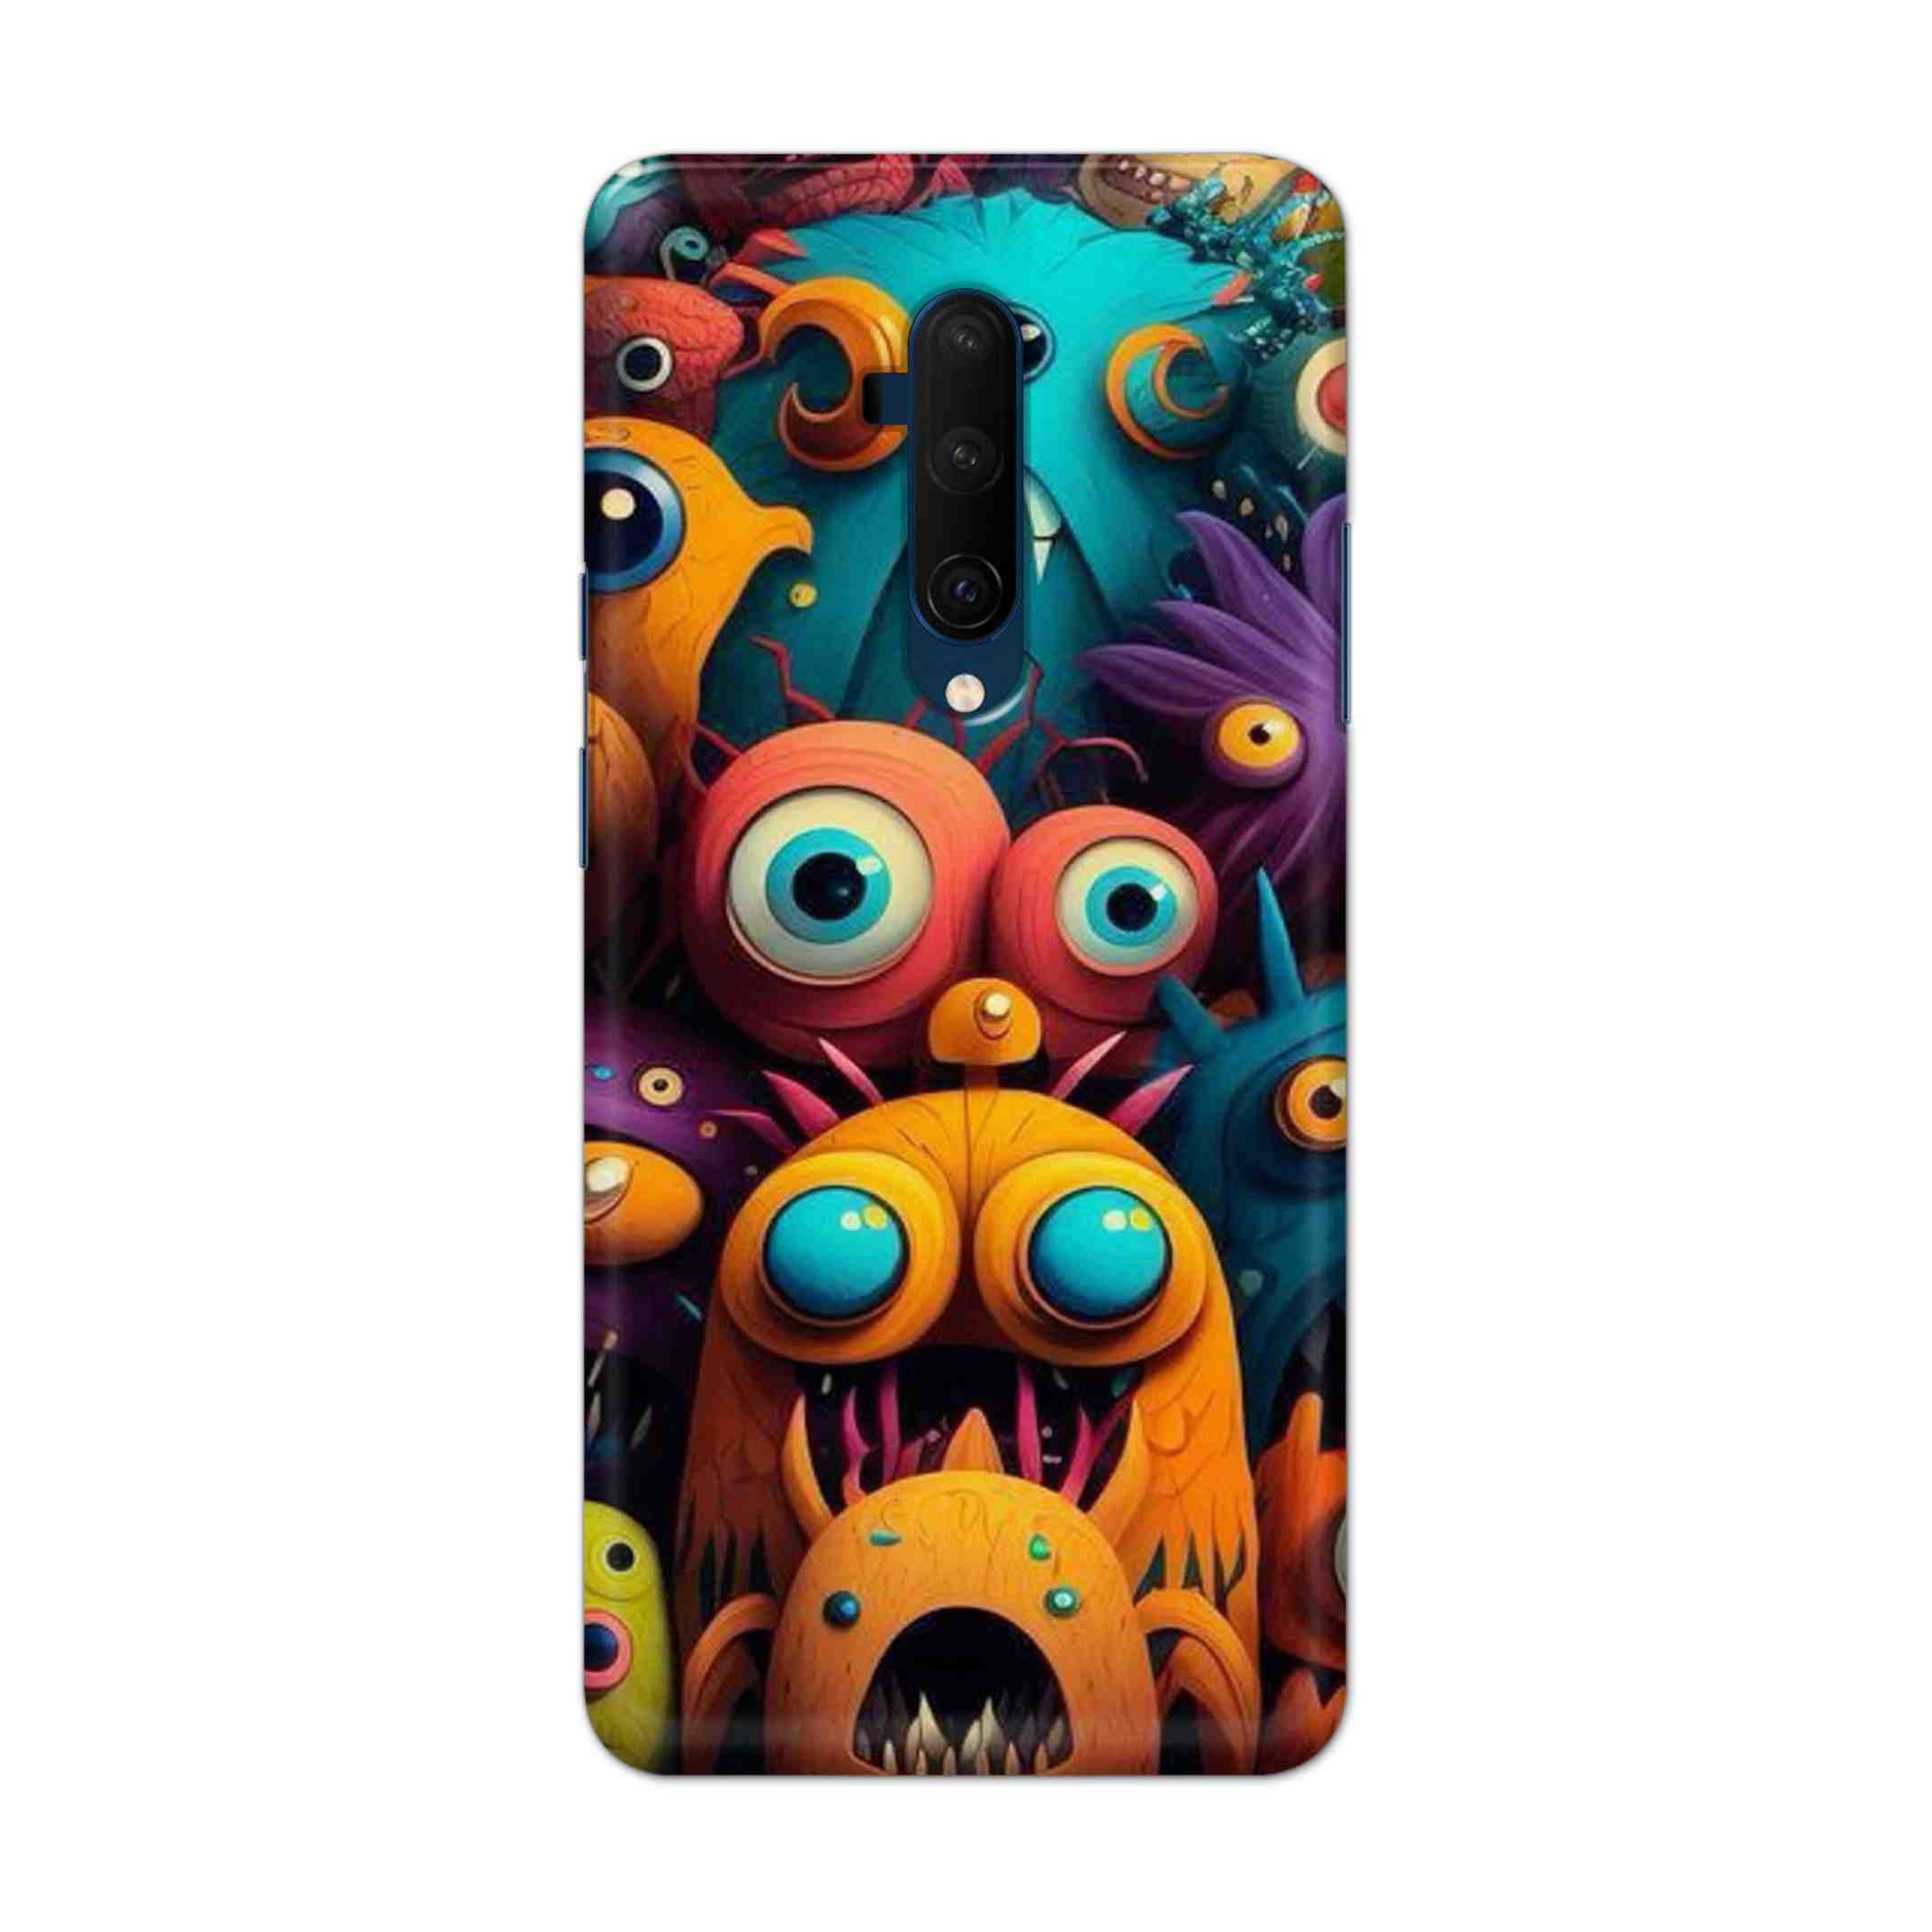 Buy Zombie Hard Back Mobile Phone Case Cover For OnePlus 7T Pro Online